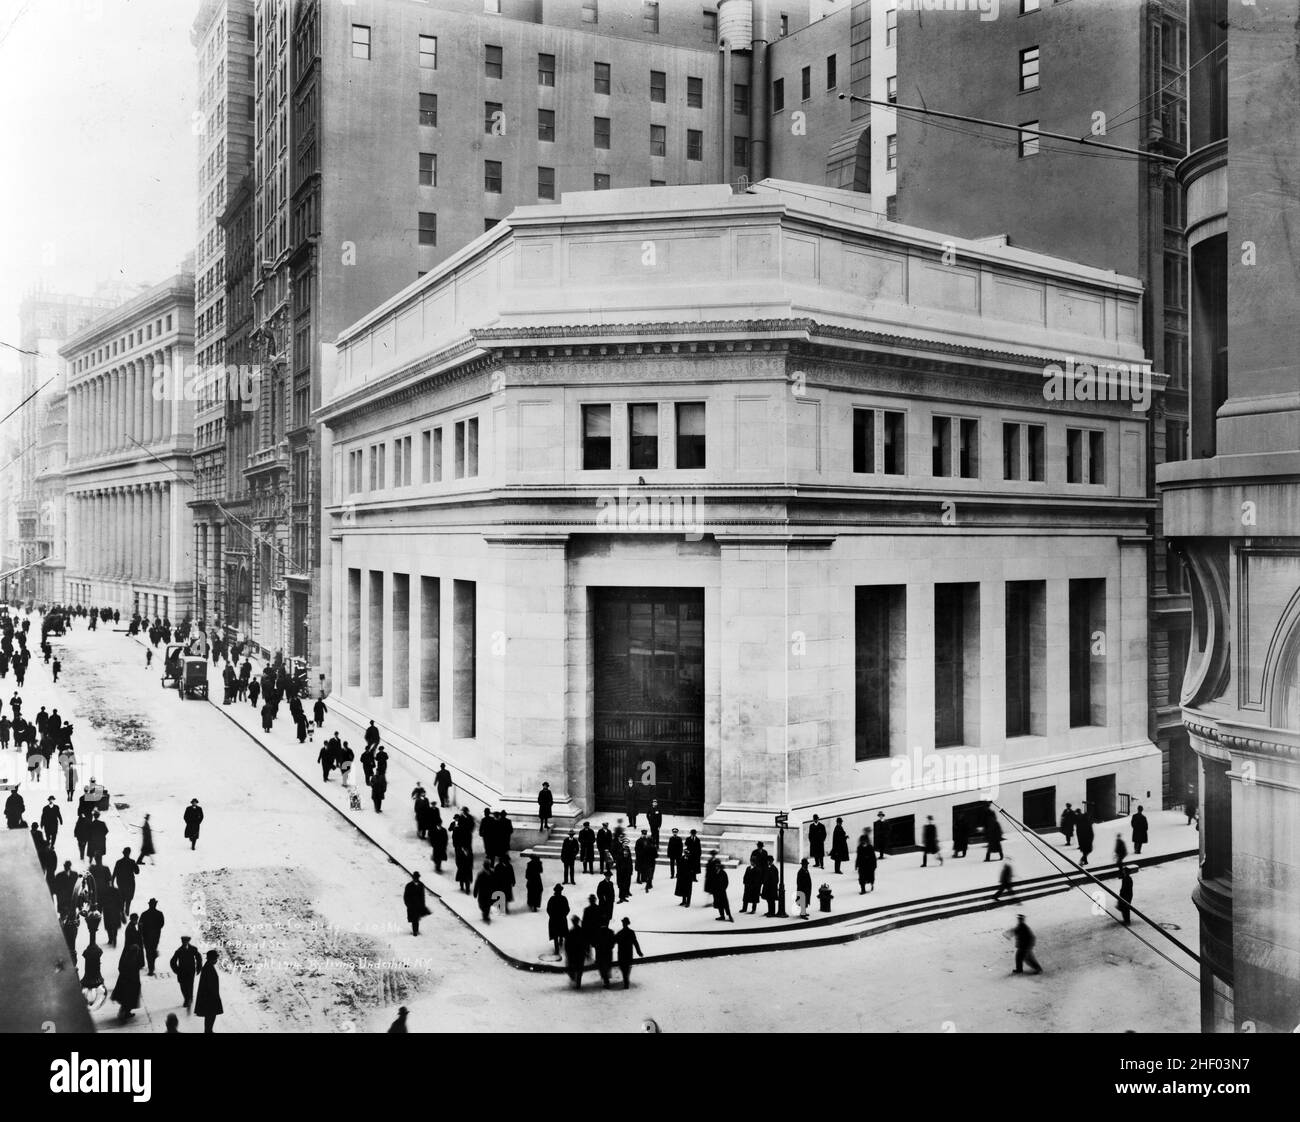 J. P. Morgan & Co. Bldg., Wall & Broad Sts., New York City, in 1914. Morgan Guaranty Company Building, with many people outside. Stock Photo